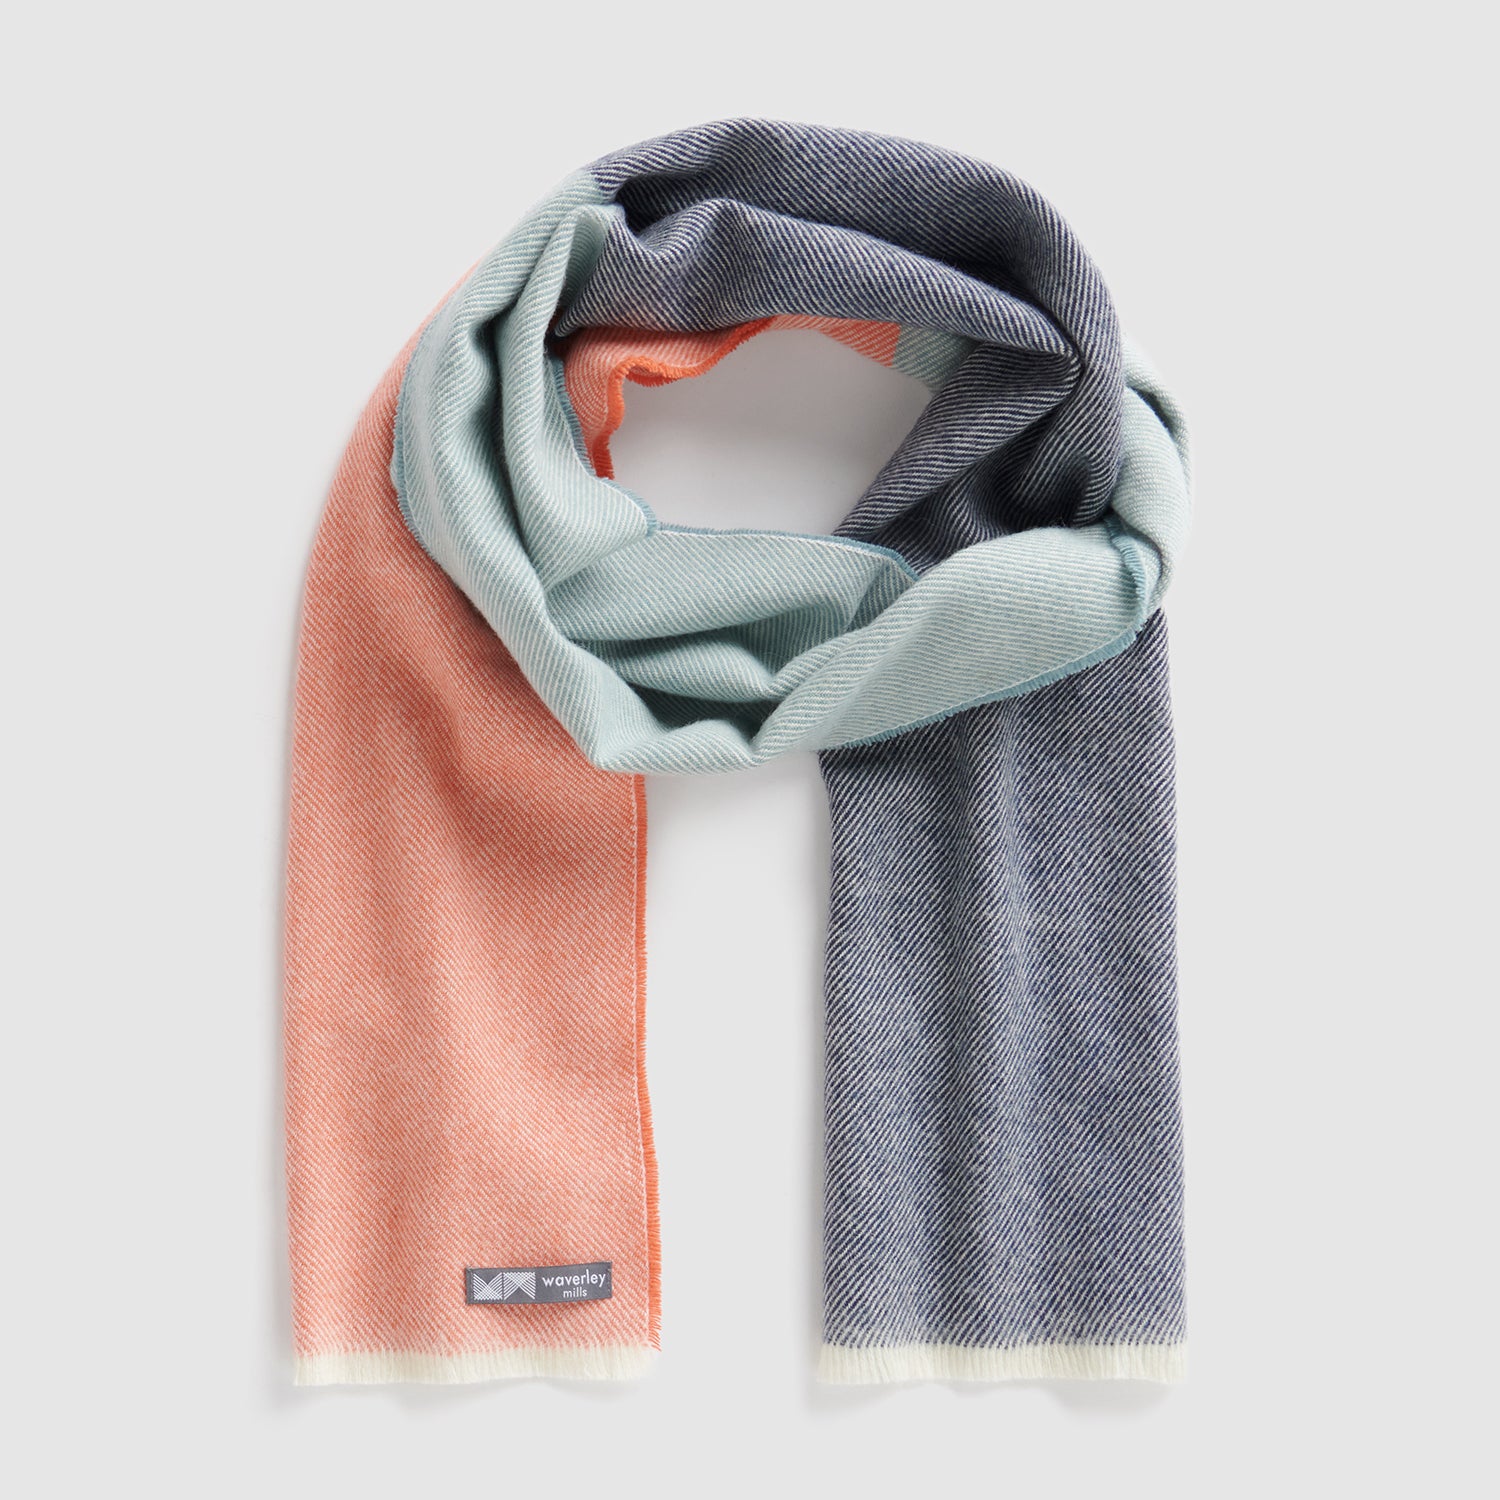 A scarf in tangerine, light blue and navy.